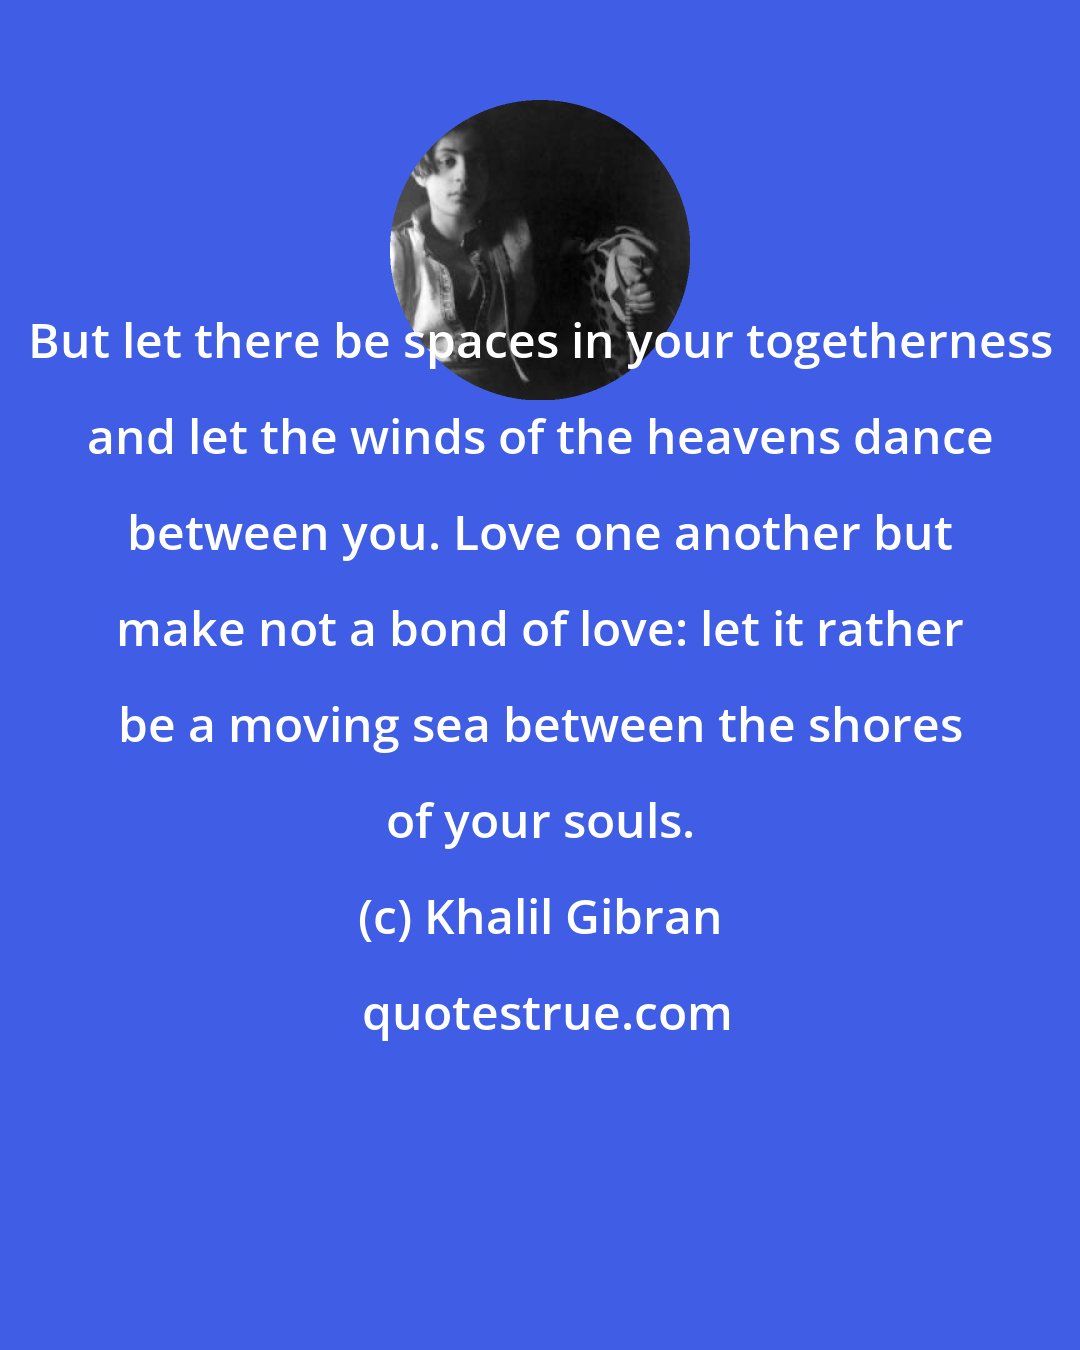 Khalil Gibran: But let there be spaces in your togetherness and let the winds of the heavens dance between you. Love one another but make not a bond of love: let it rather be a moving sea between the shores of your souls.